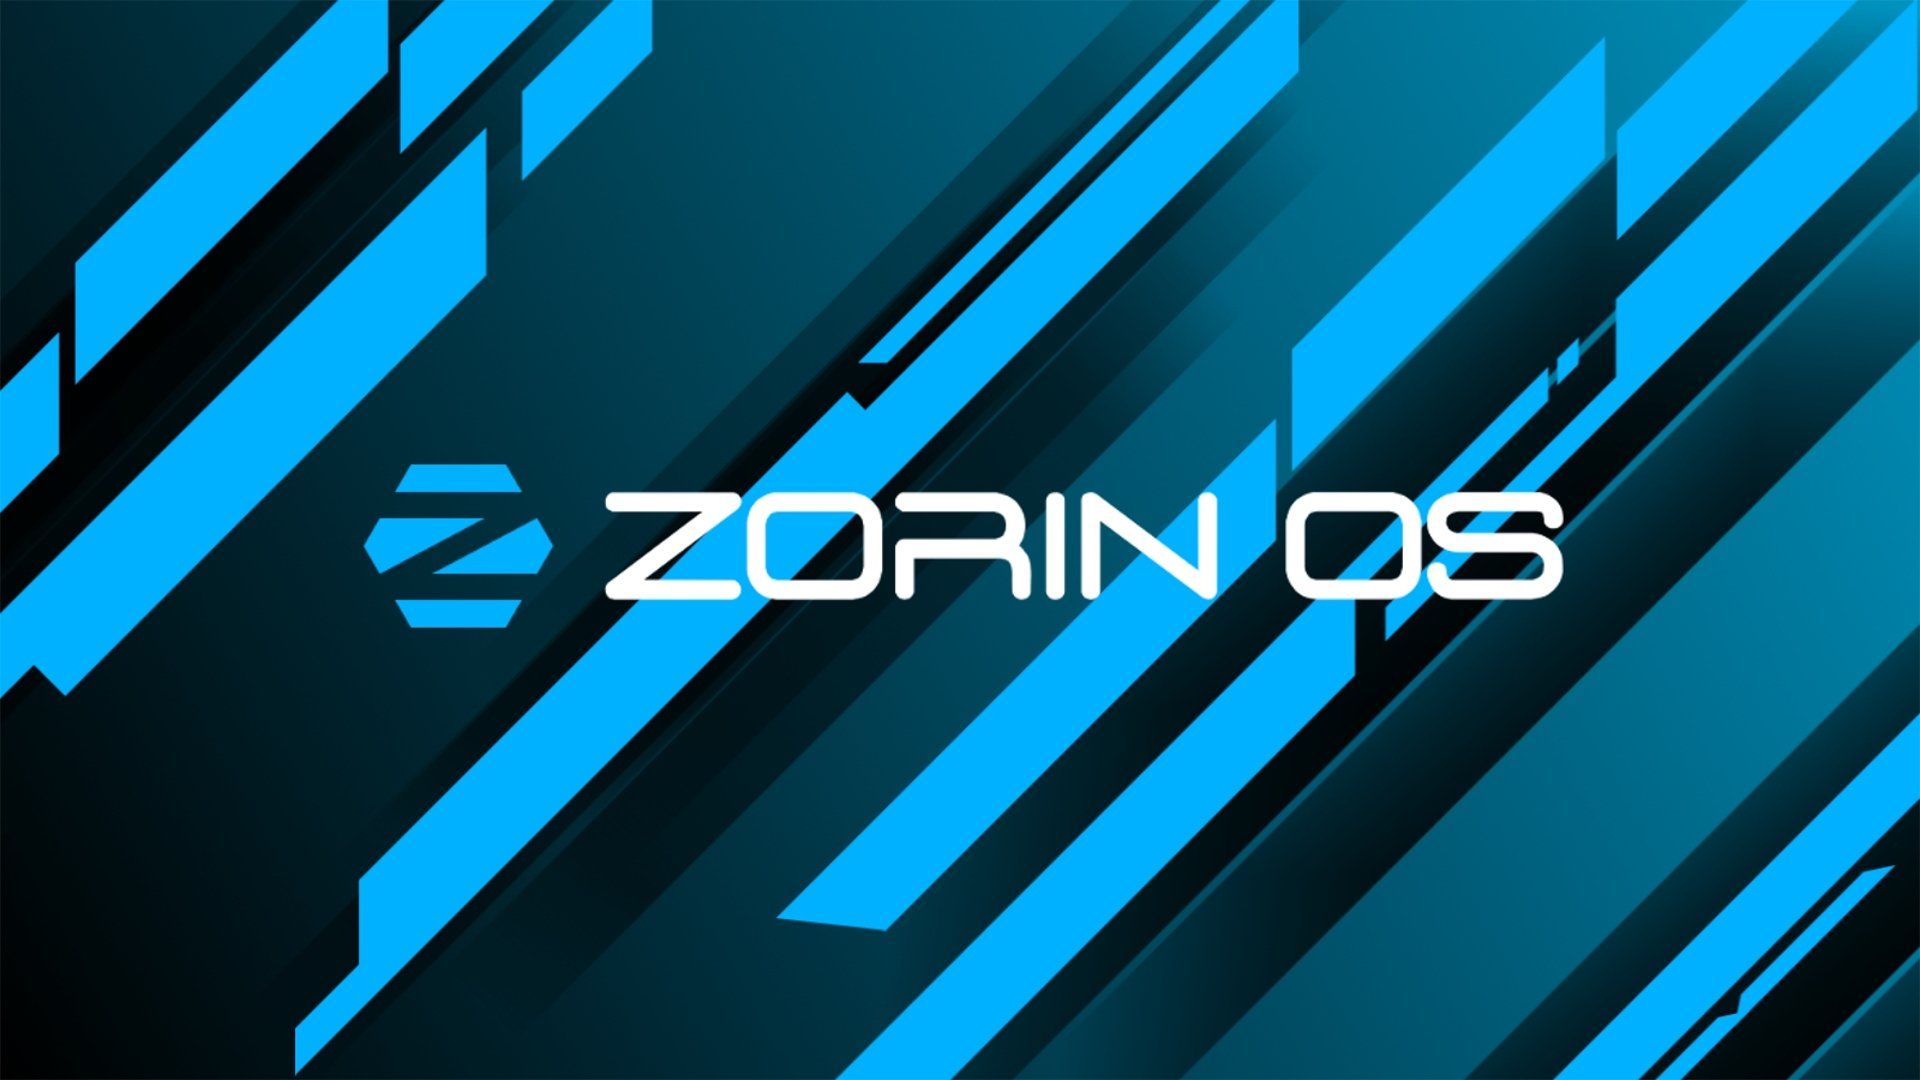 Zorin Gallery Wallpaper for Free Best HQFX Background. Os wallpaper, Wallpaper, Neon signs